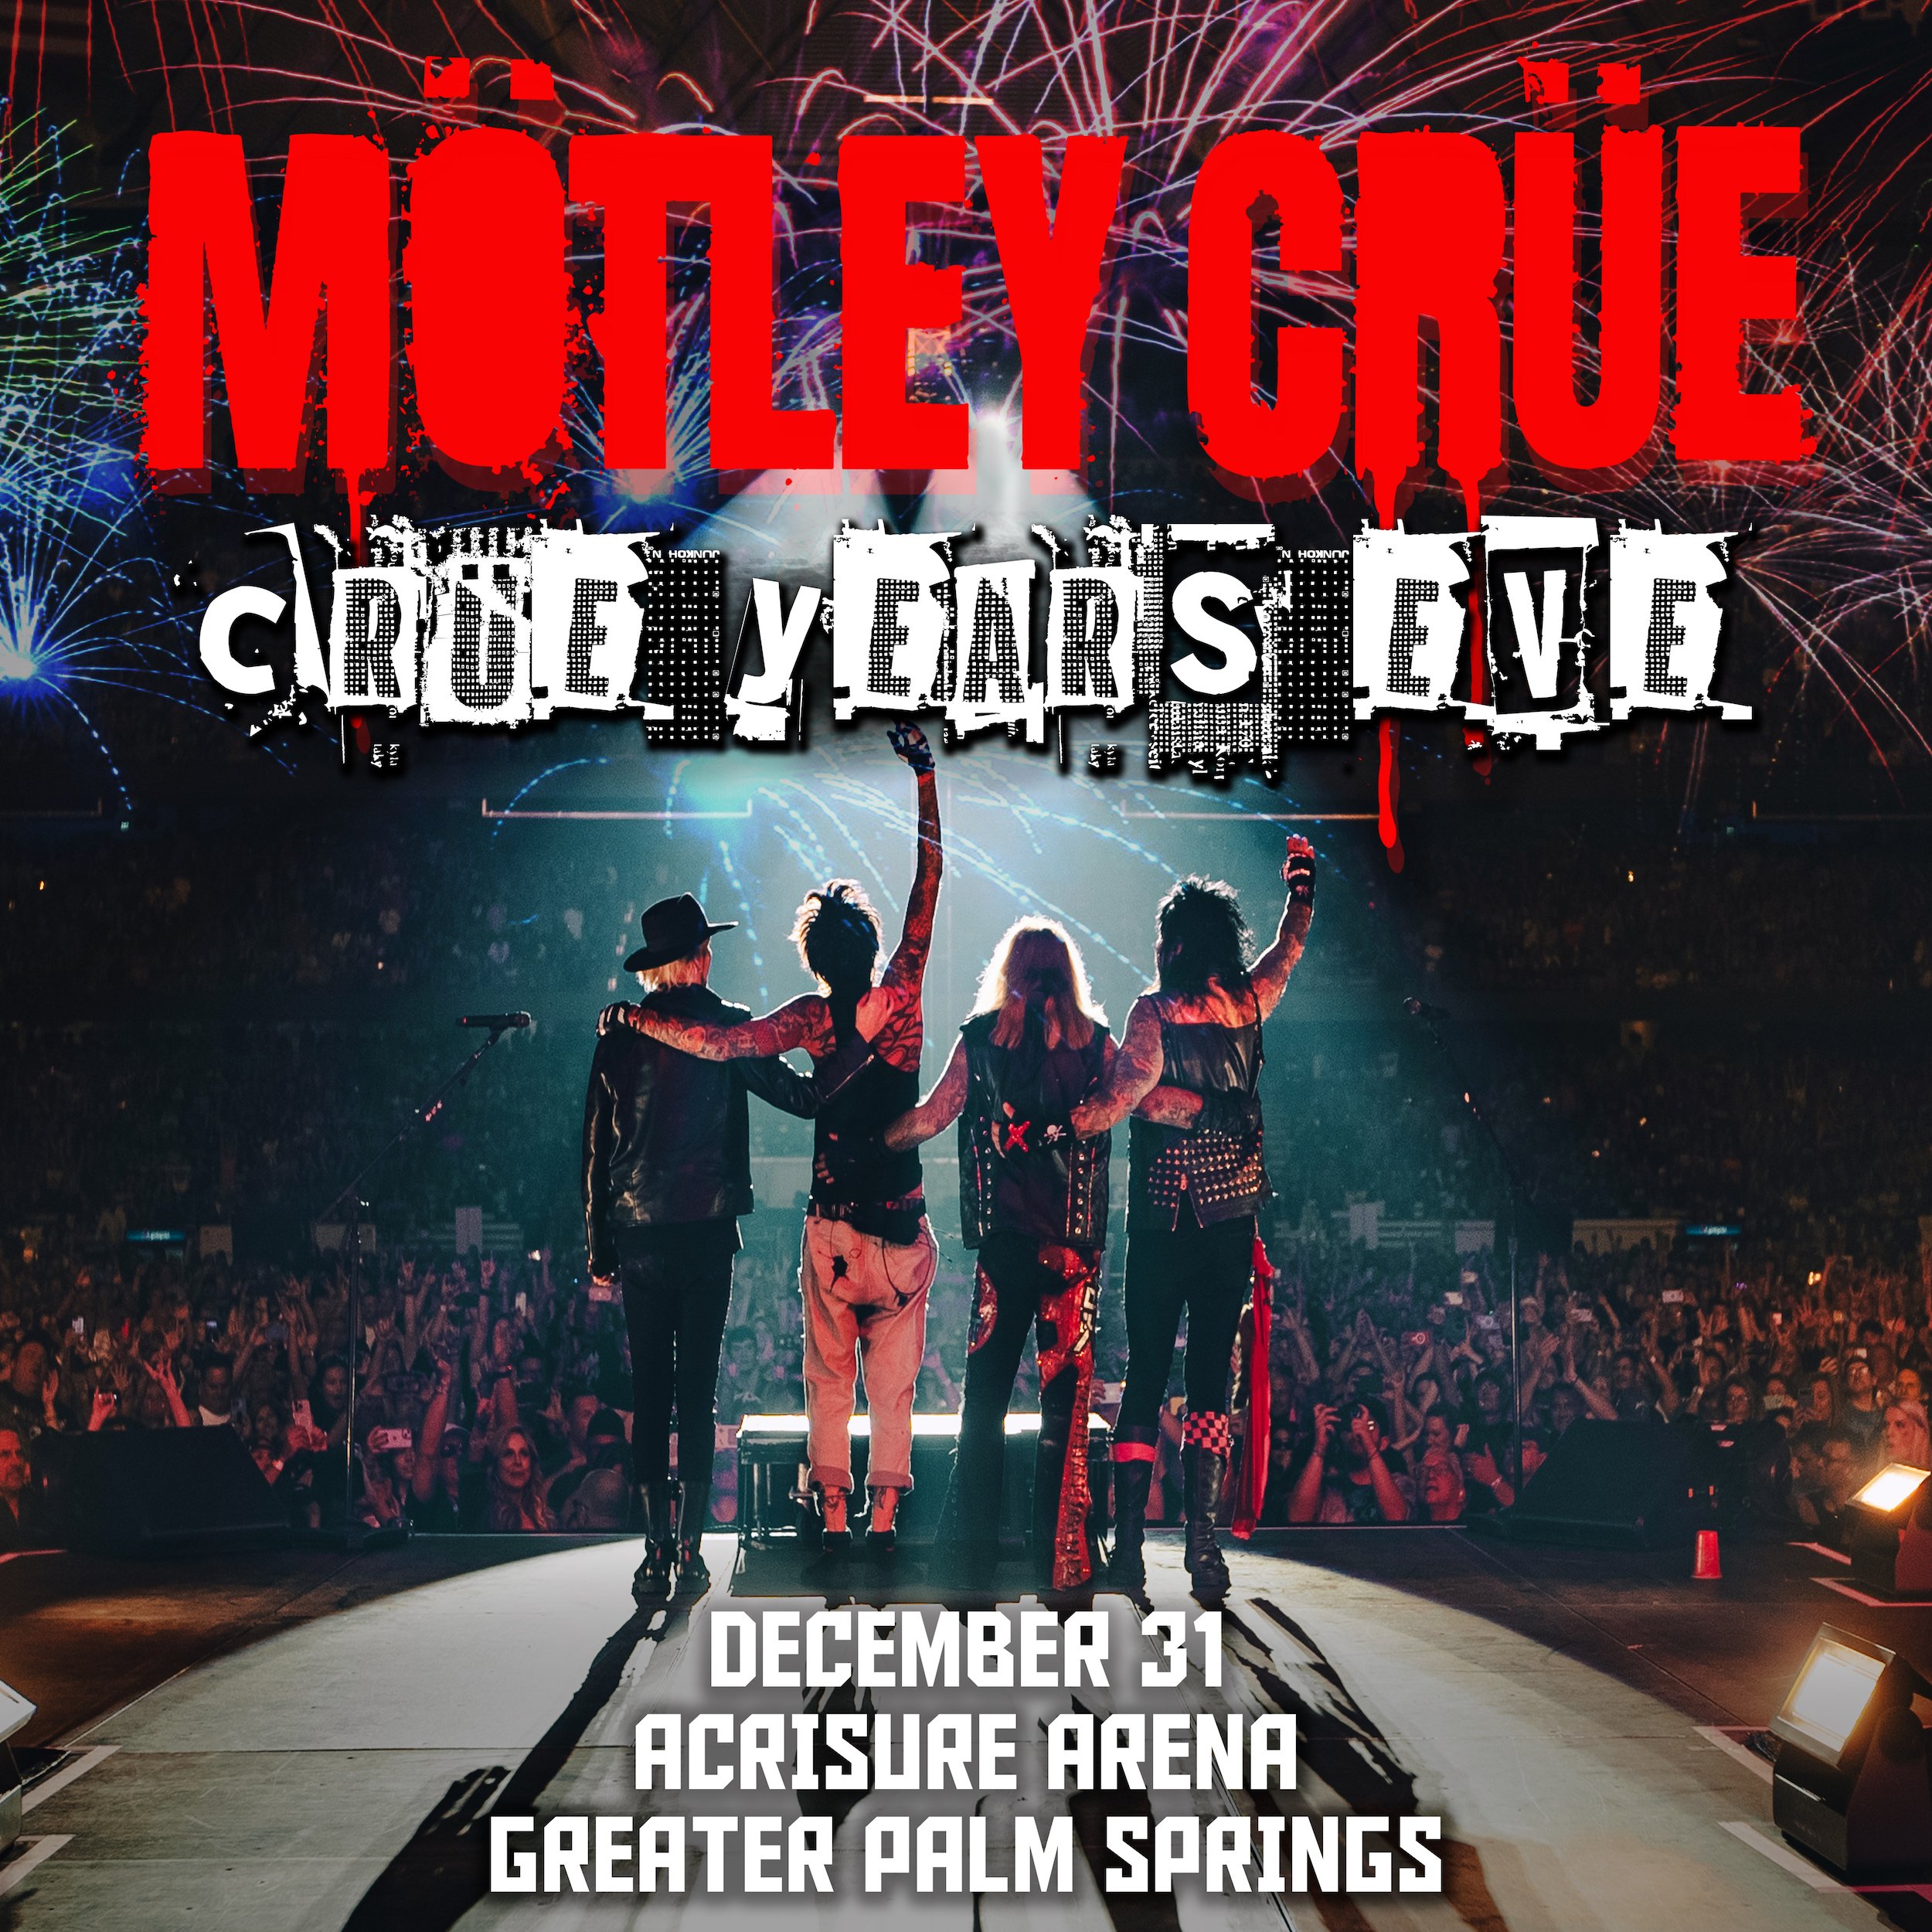 LIVE WIRE INTERACTIVE TAB (ver 3) by Mötley Crüe @ Ultimate-Guitar.Com